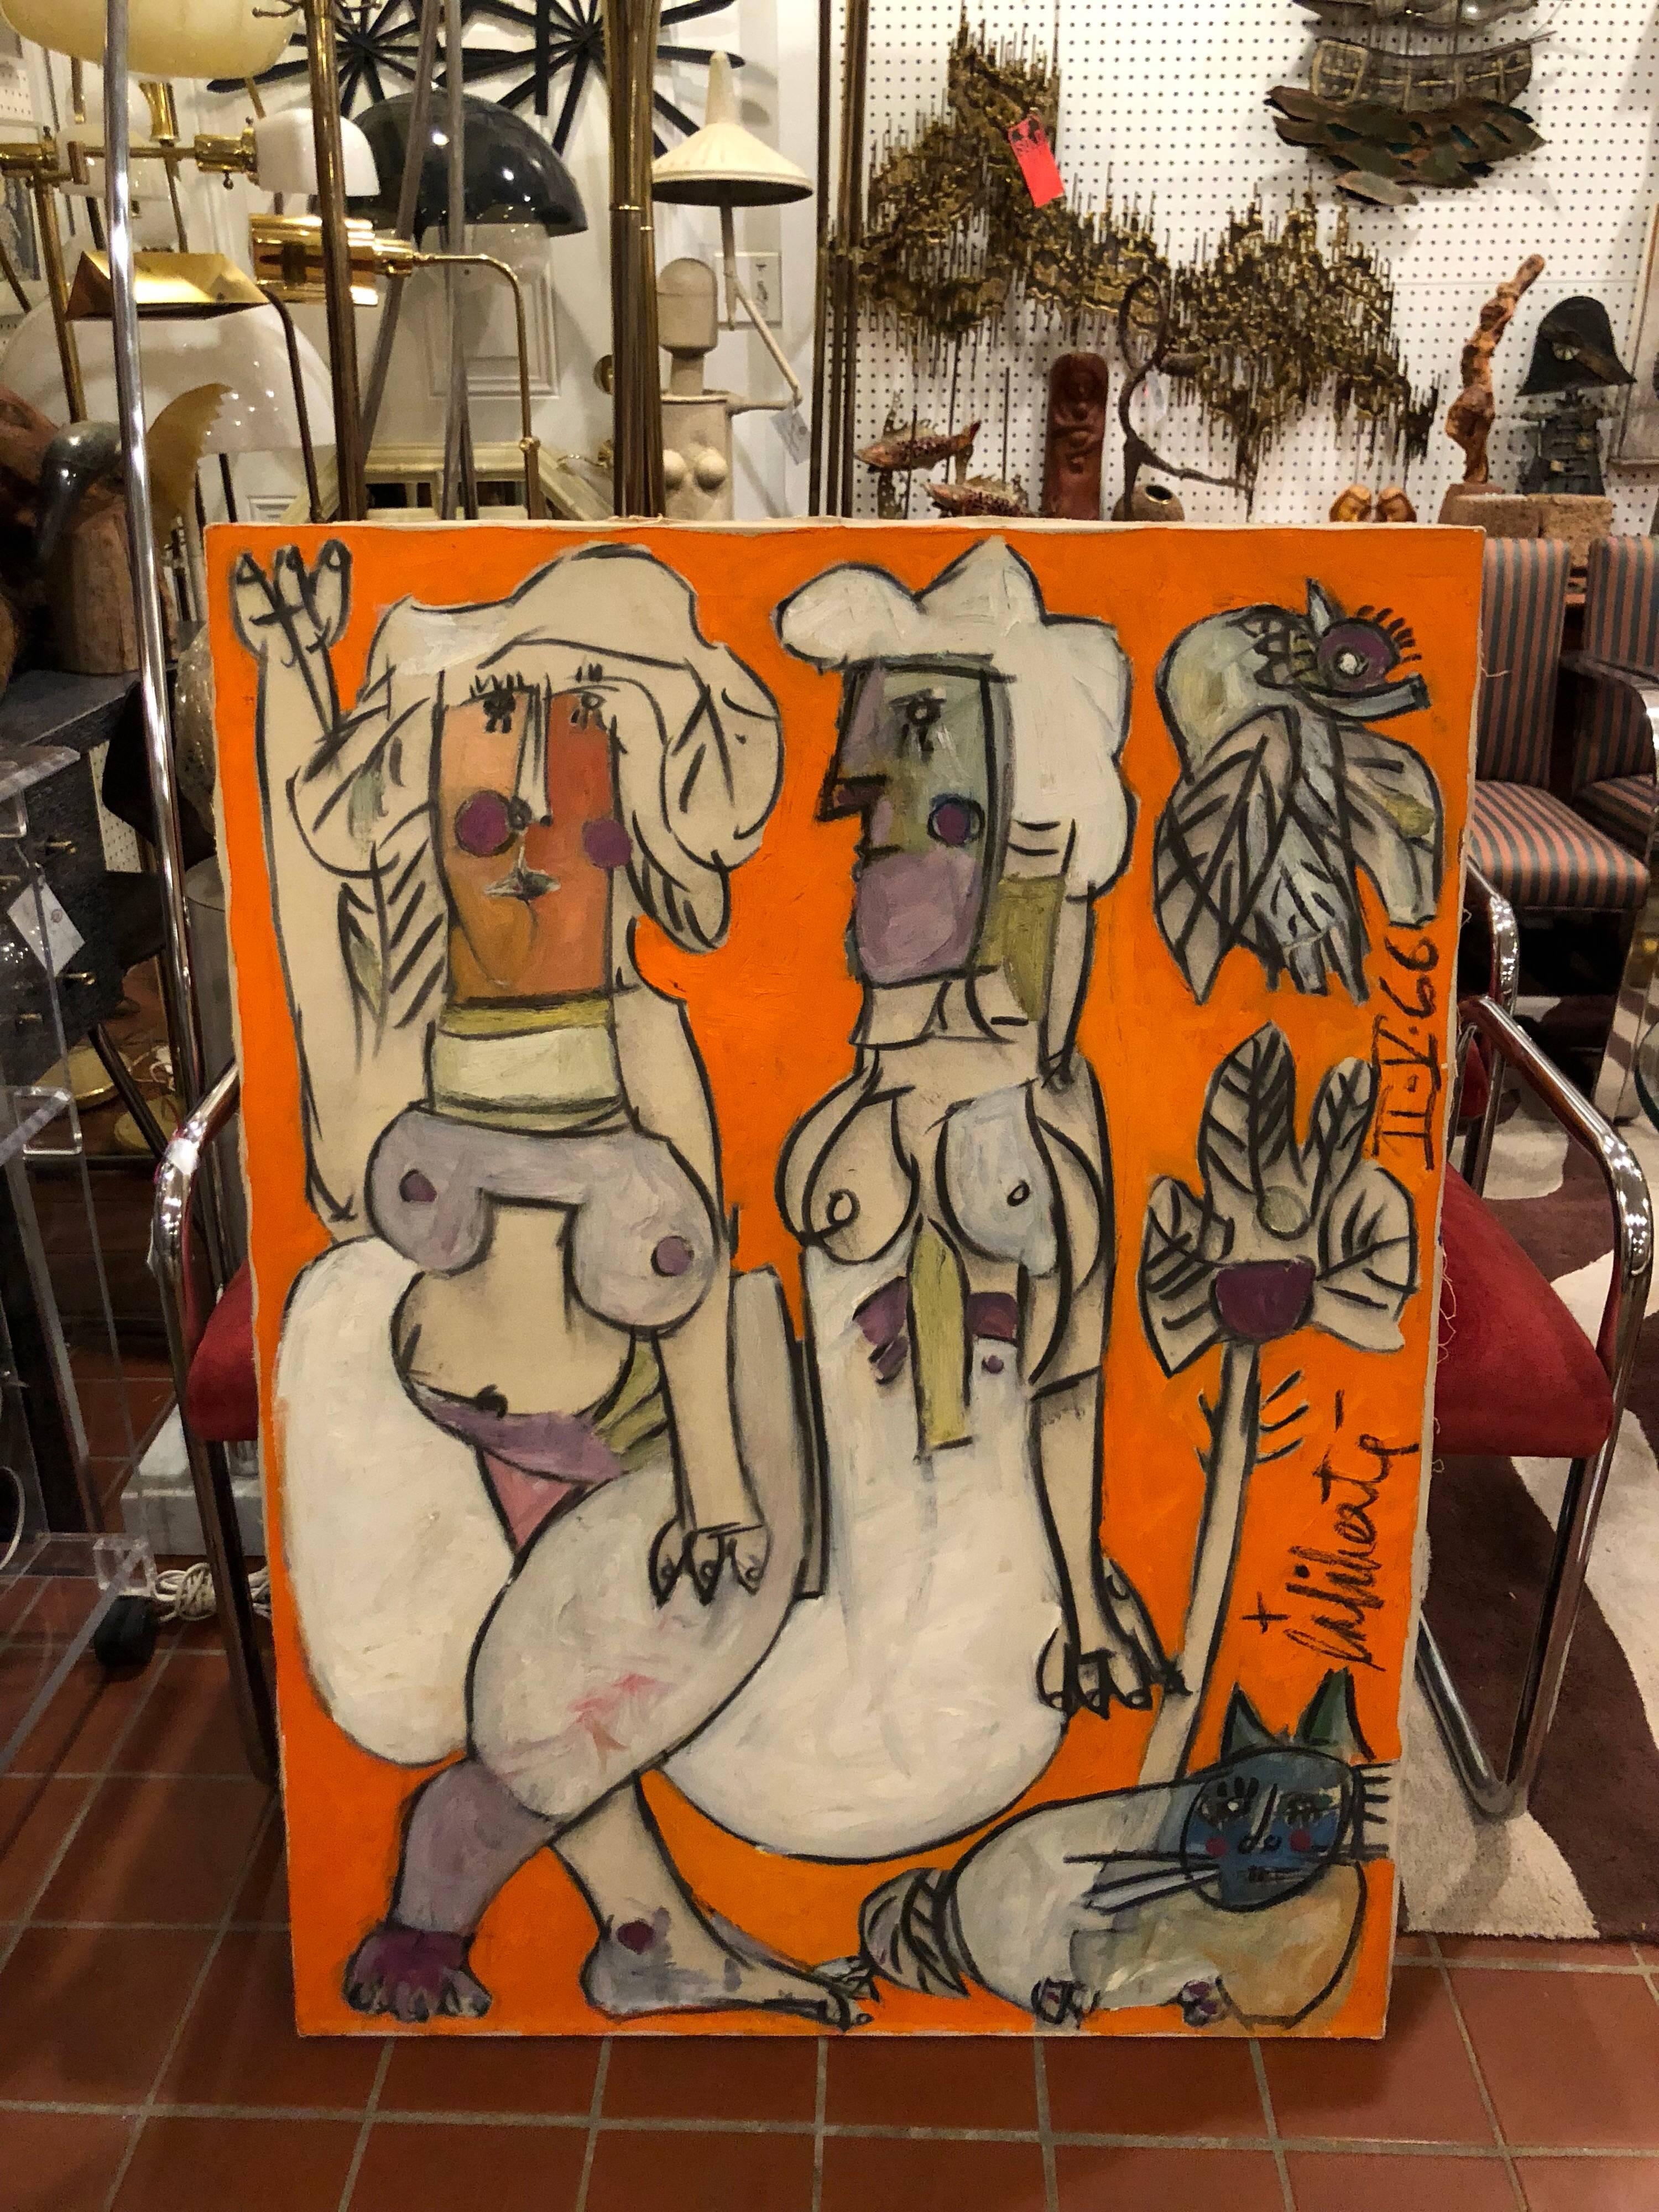 Norman LaLiberte's “Hommage to Picasso” original signed oil on canvas painting. His cubist style in this piece is a bow to world renown Pablo Picasso. A whimsical and colorful depiction of two women, a cat , bird and a plant.
Norman Laliberté (born